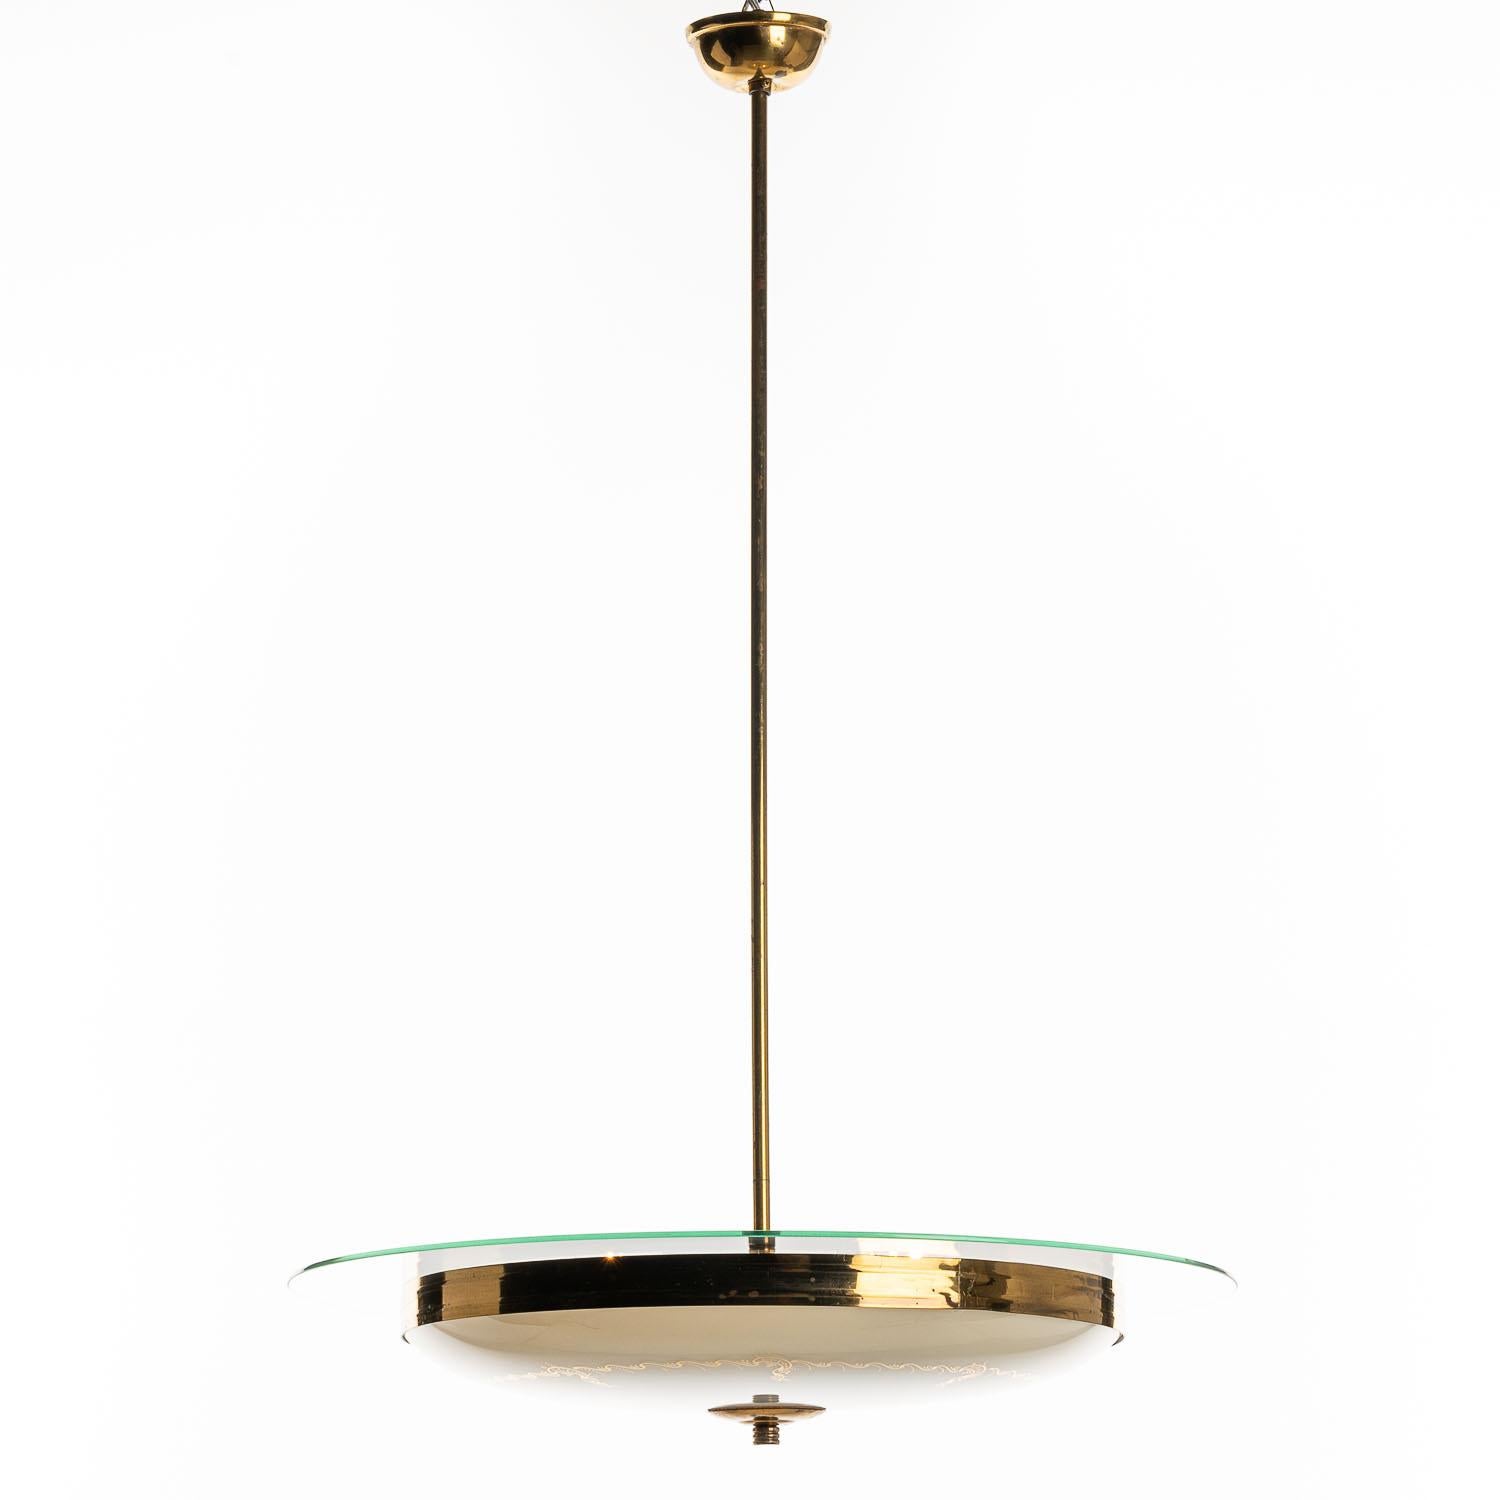 This stunning and super elegant light consisting of a brass frame and 2 unique glass reflector/saucers. 
The lower round curved glass reflector with gold patterns mounts below a larger flat clear glass reflector. A beautiful brass ring to connect